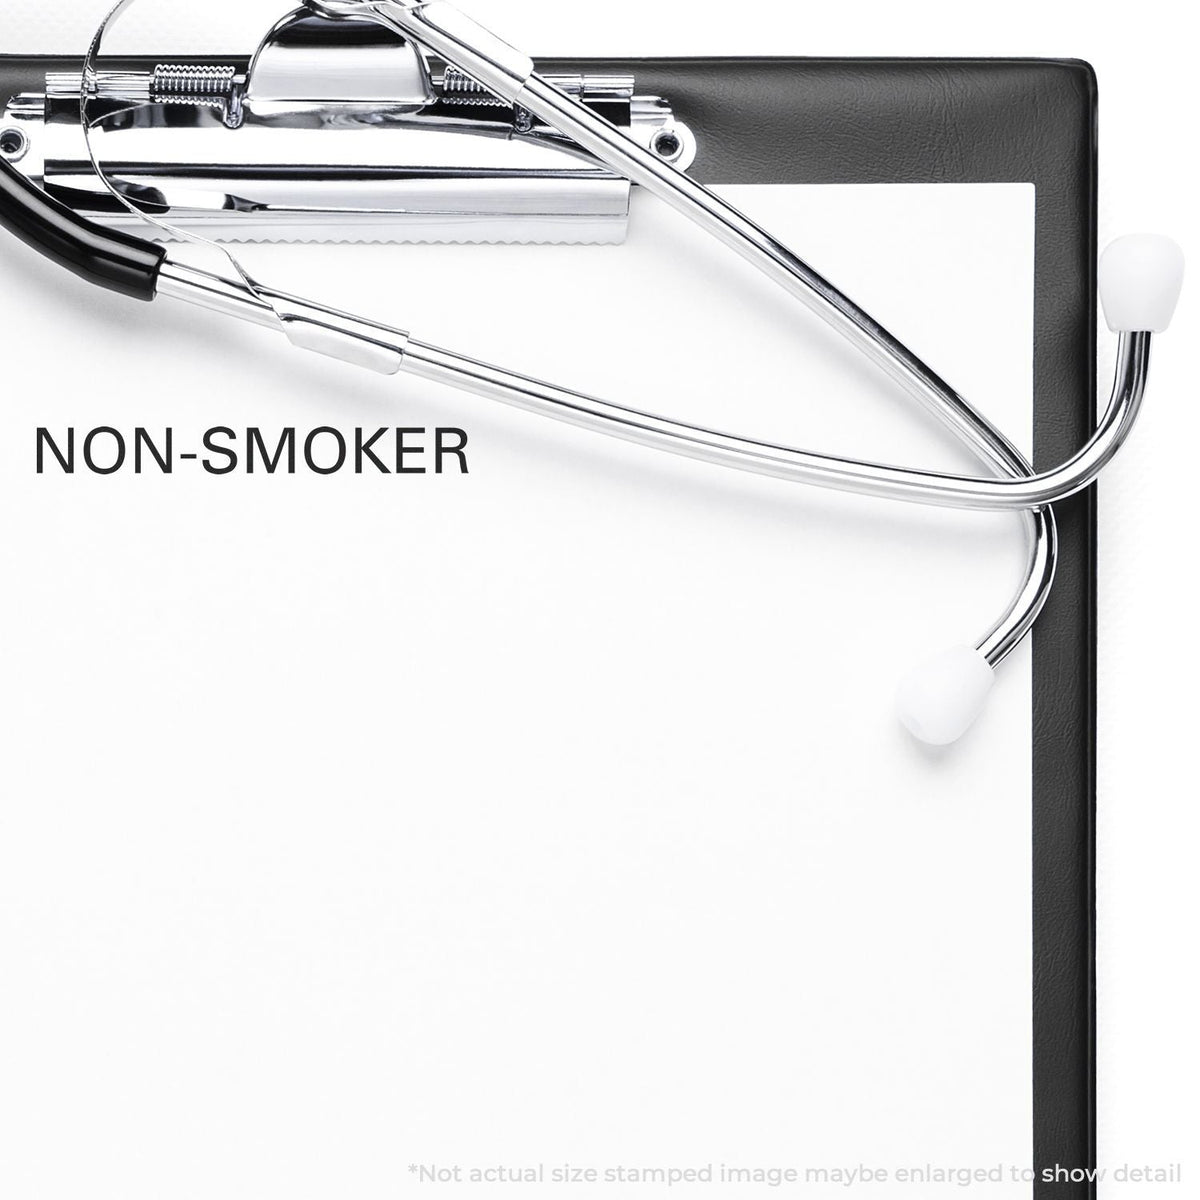 In Use Self-Inking Non-Smoker Stamp Image